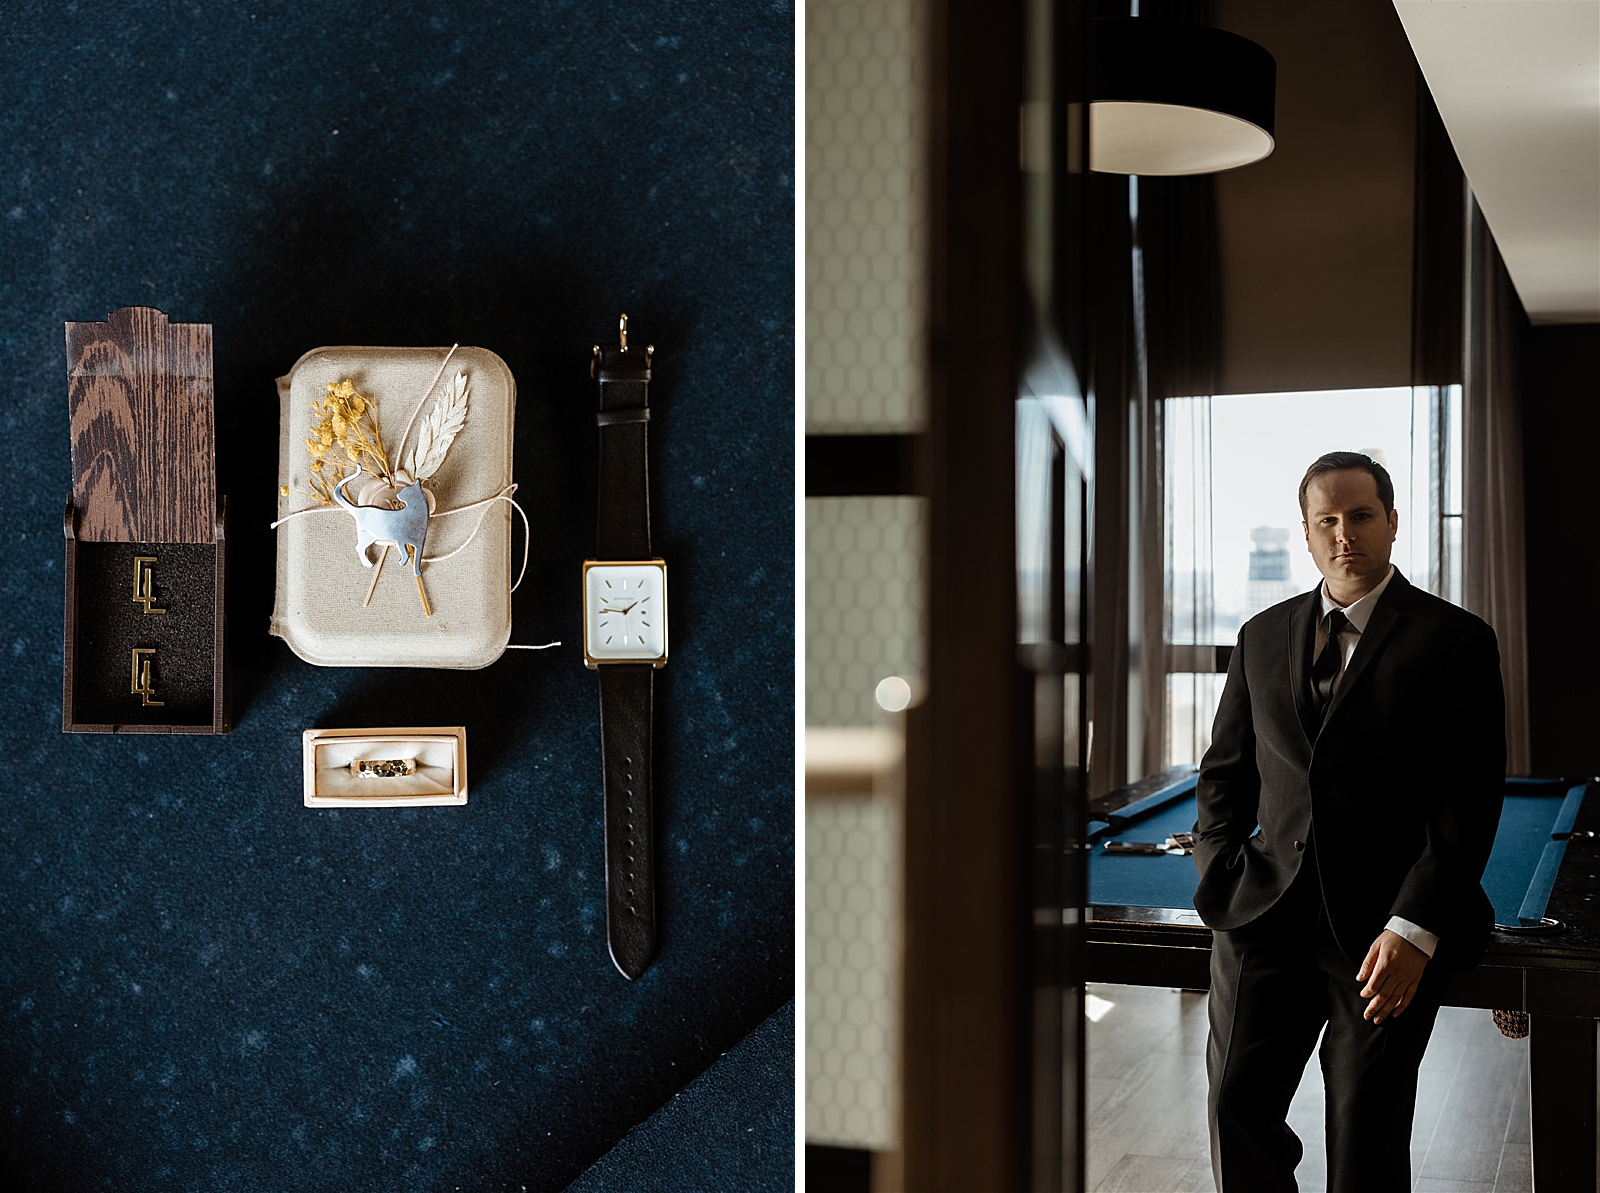 Left photo: Close up shot of the groom's details, including a watch, cufflinks, ring, and boutonniere. 
Right photo: Shot of groom in his suit as he leans against a pool table. 